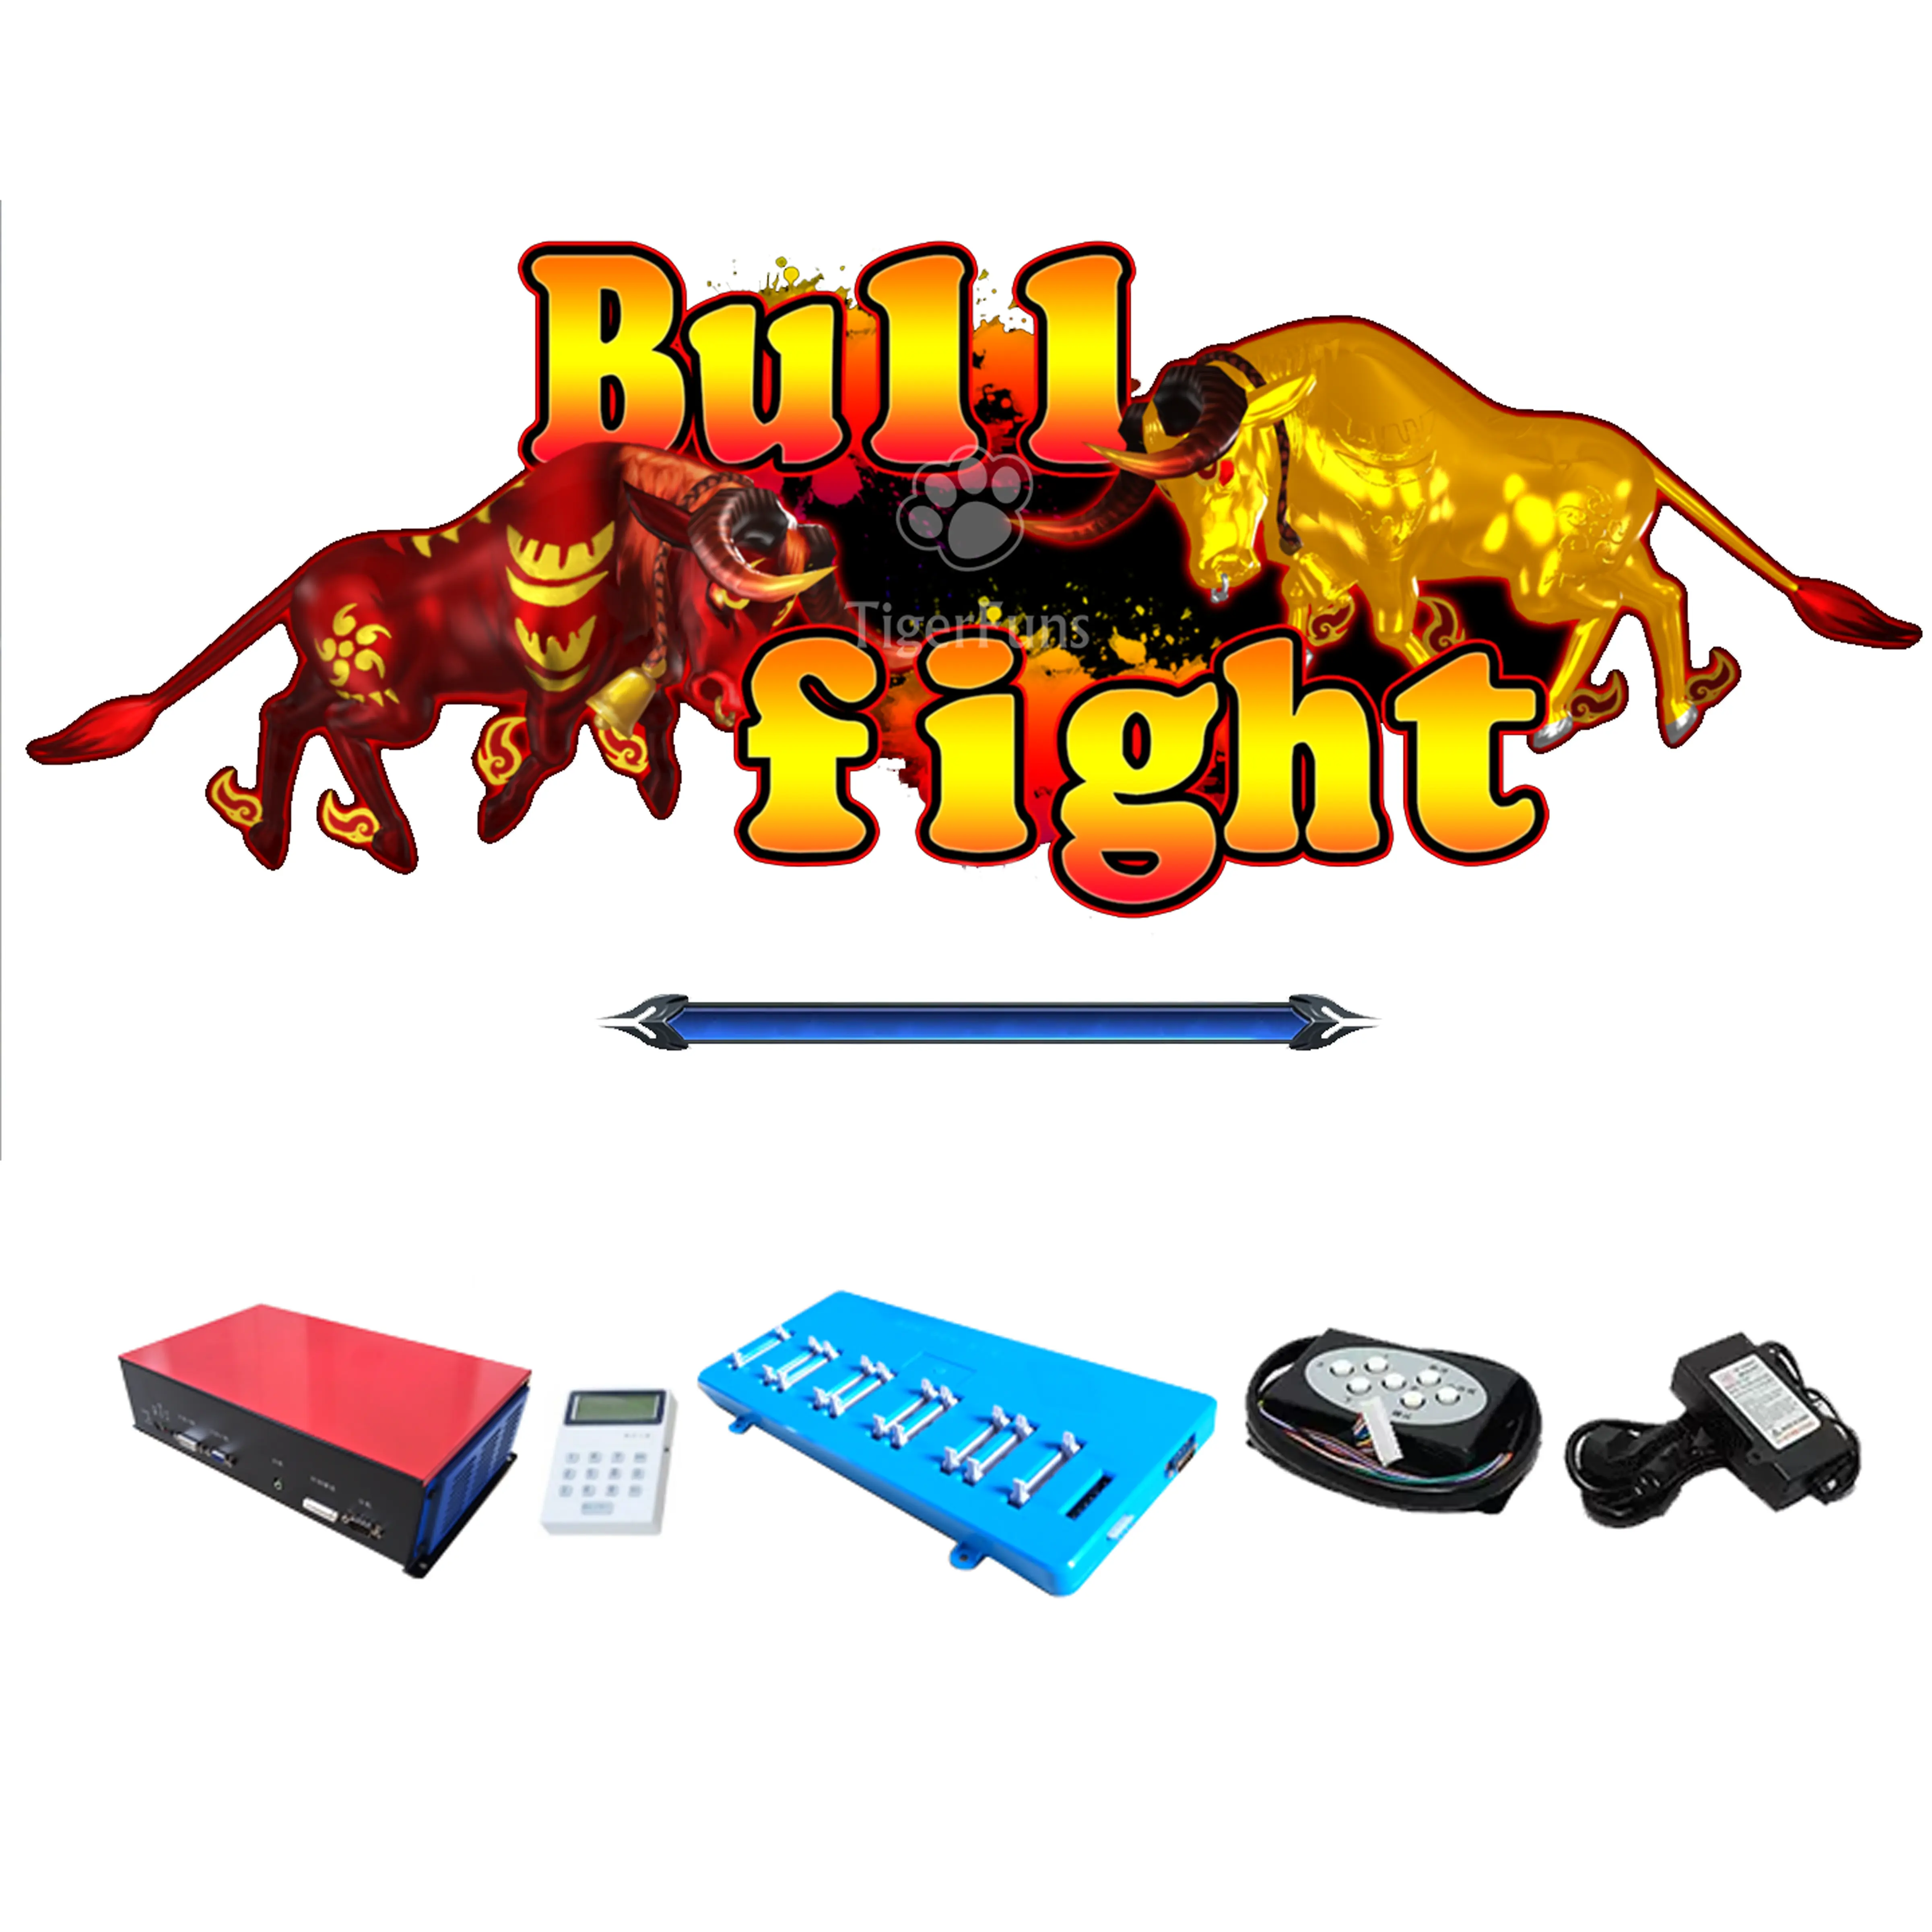 2022 New! Popular American Bull fight fishing game board/ fish game Machine Coin Operated Fishing Game Table 10 player